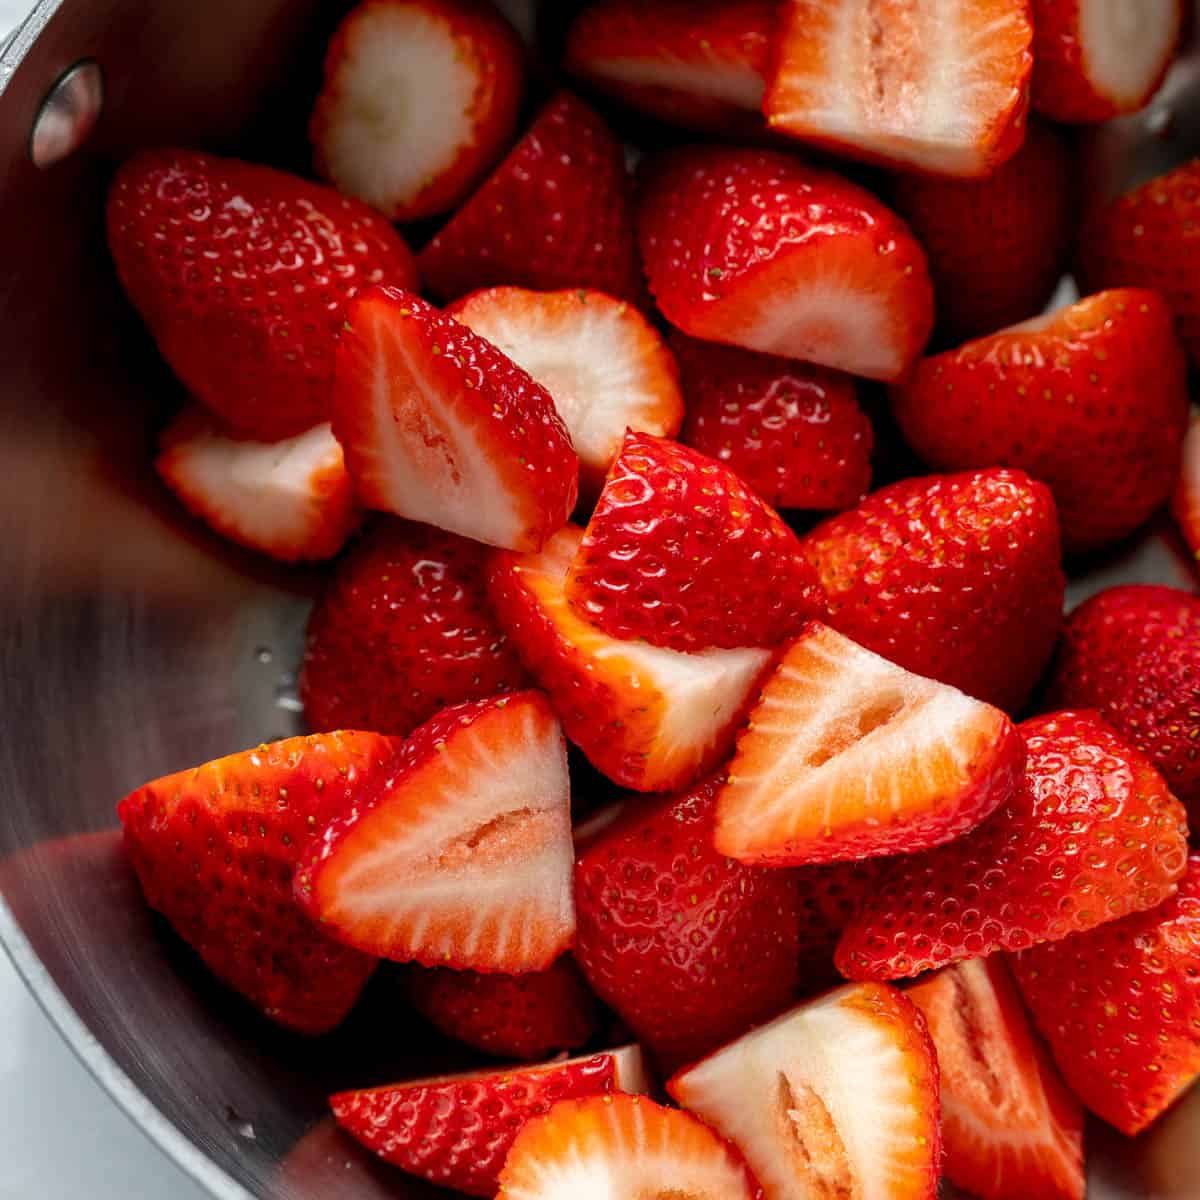 A close up of halved strawberries in a pot